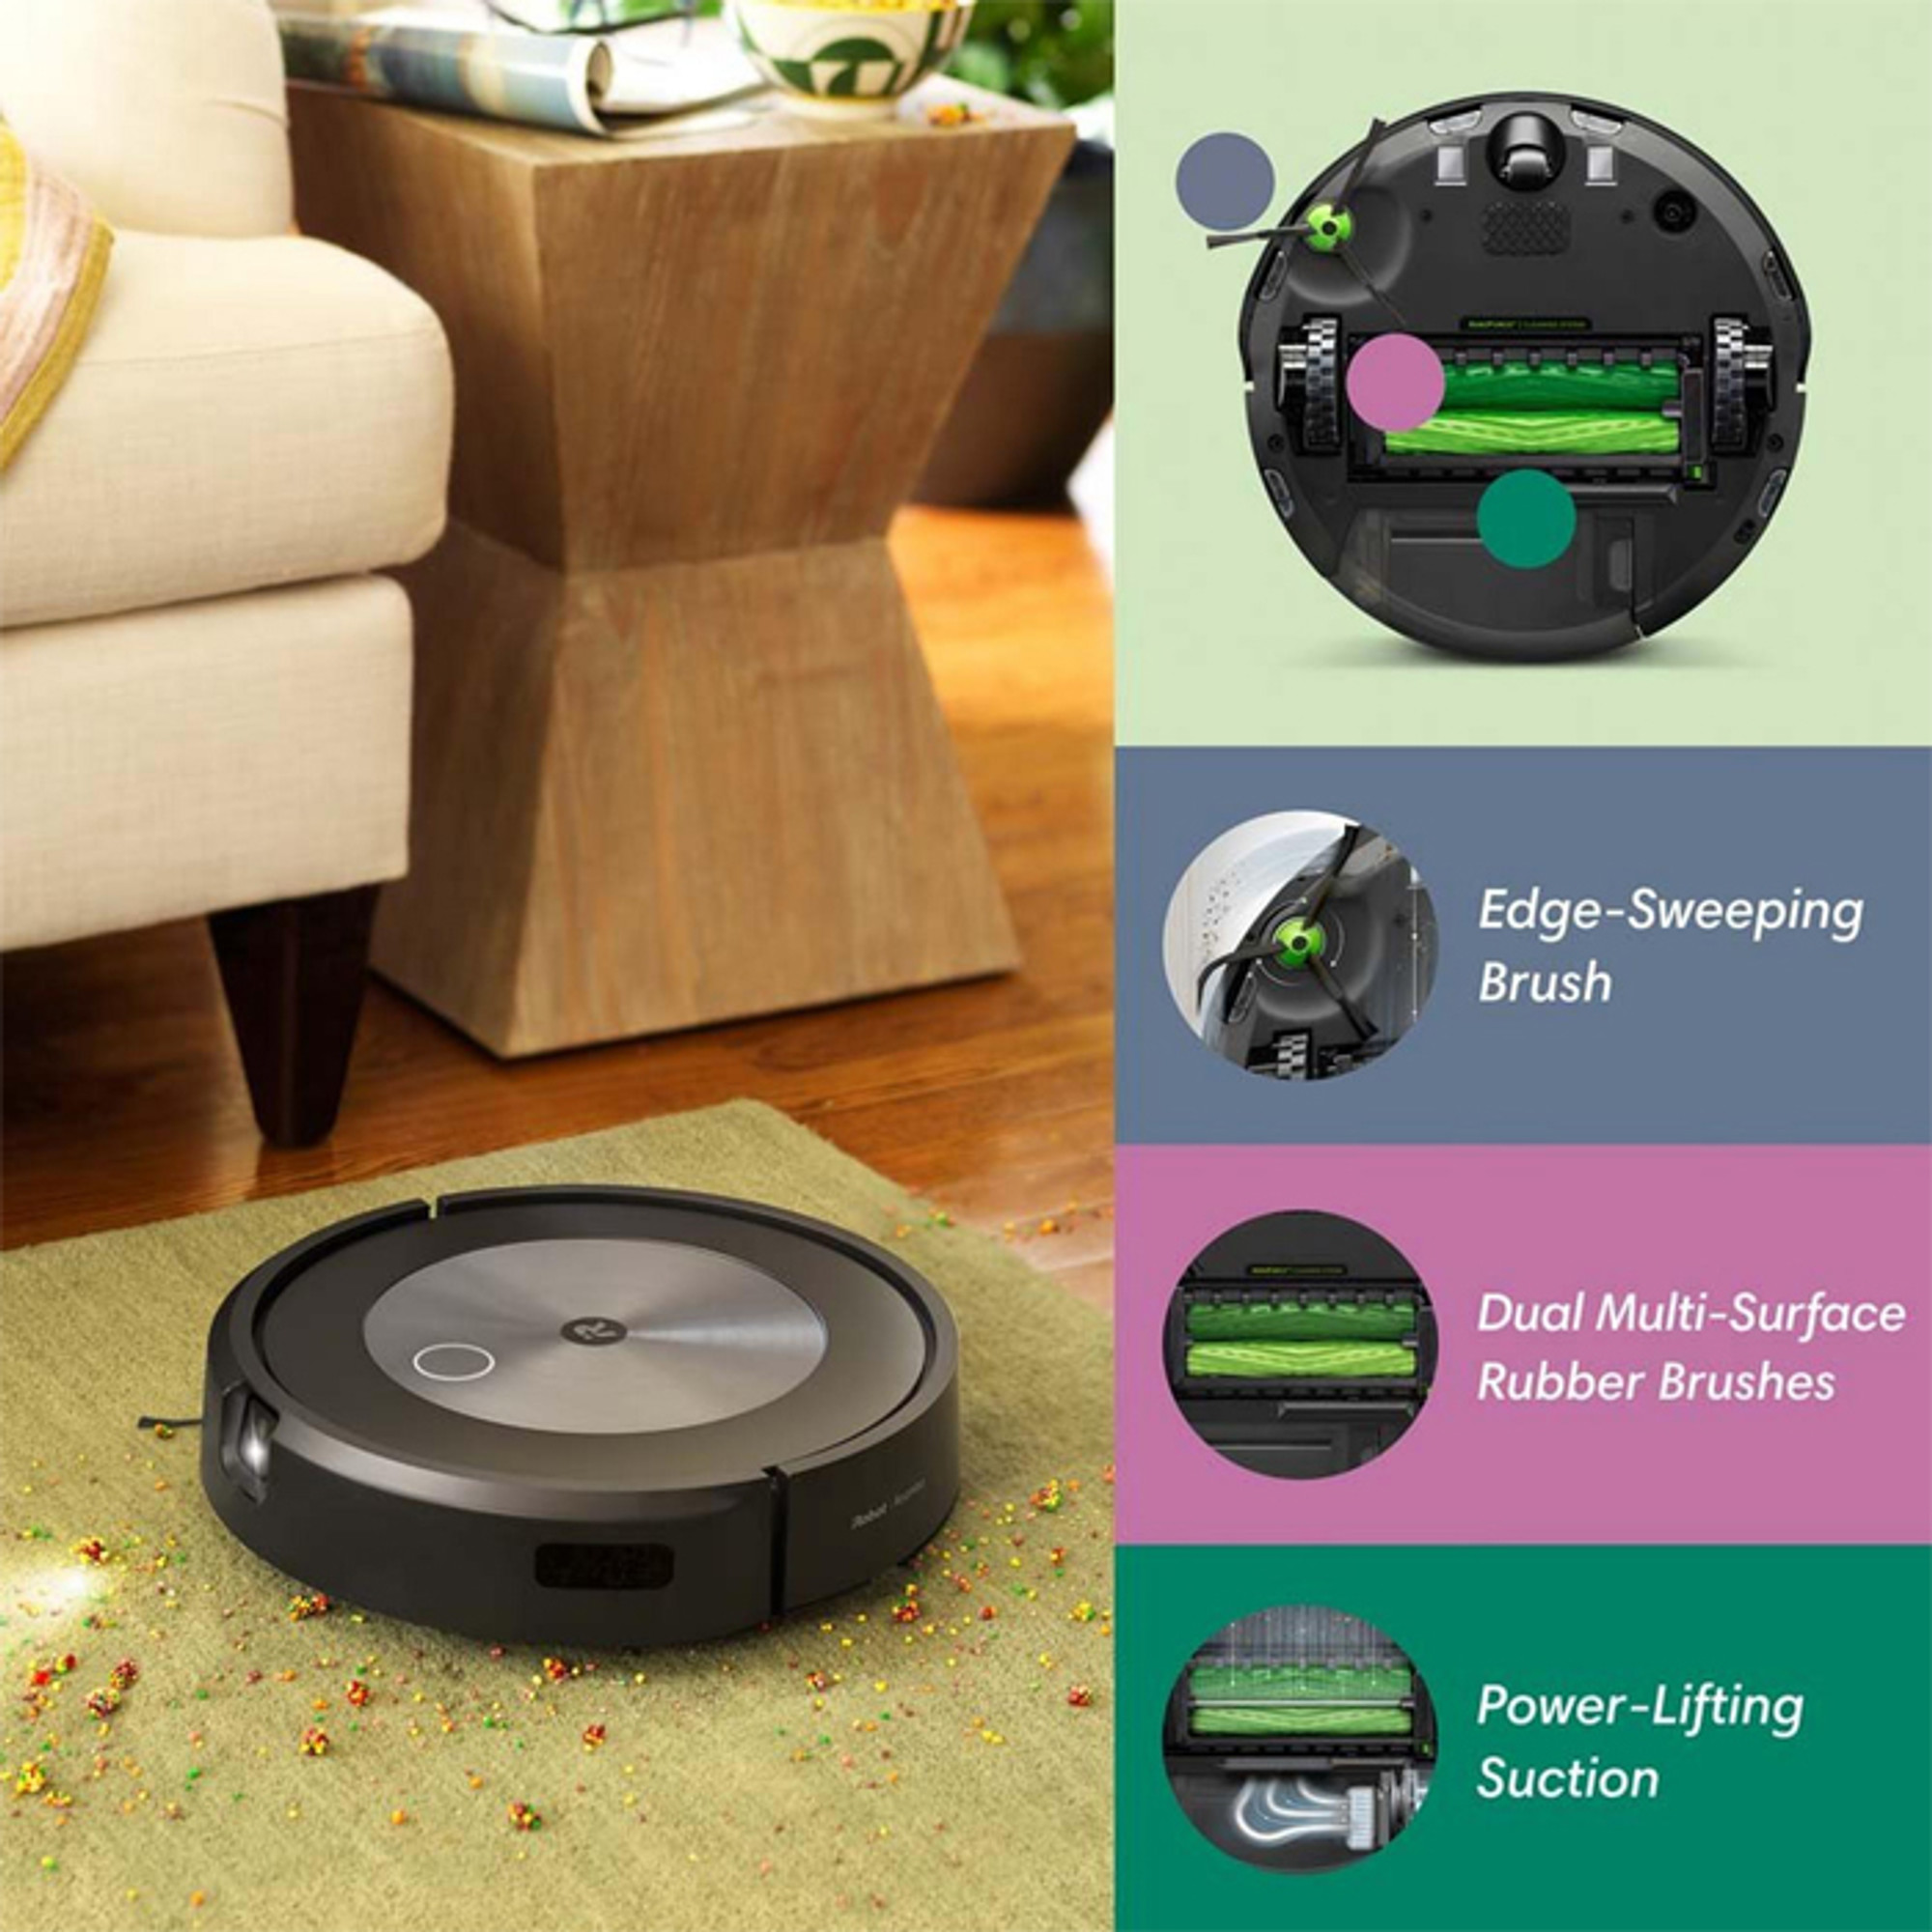 Buy Roomba j7+ Robot Vacuum with Automatic Dirt Disposal by iRobot